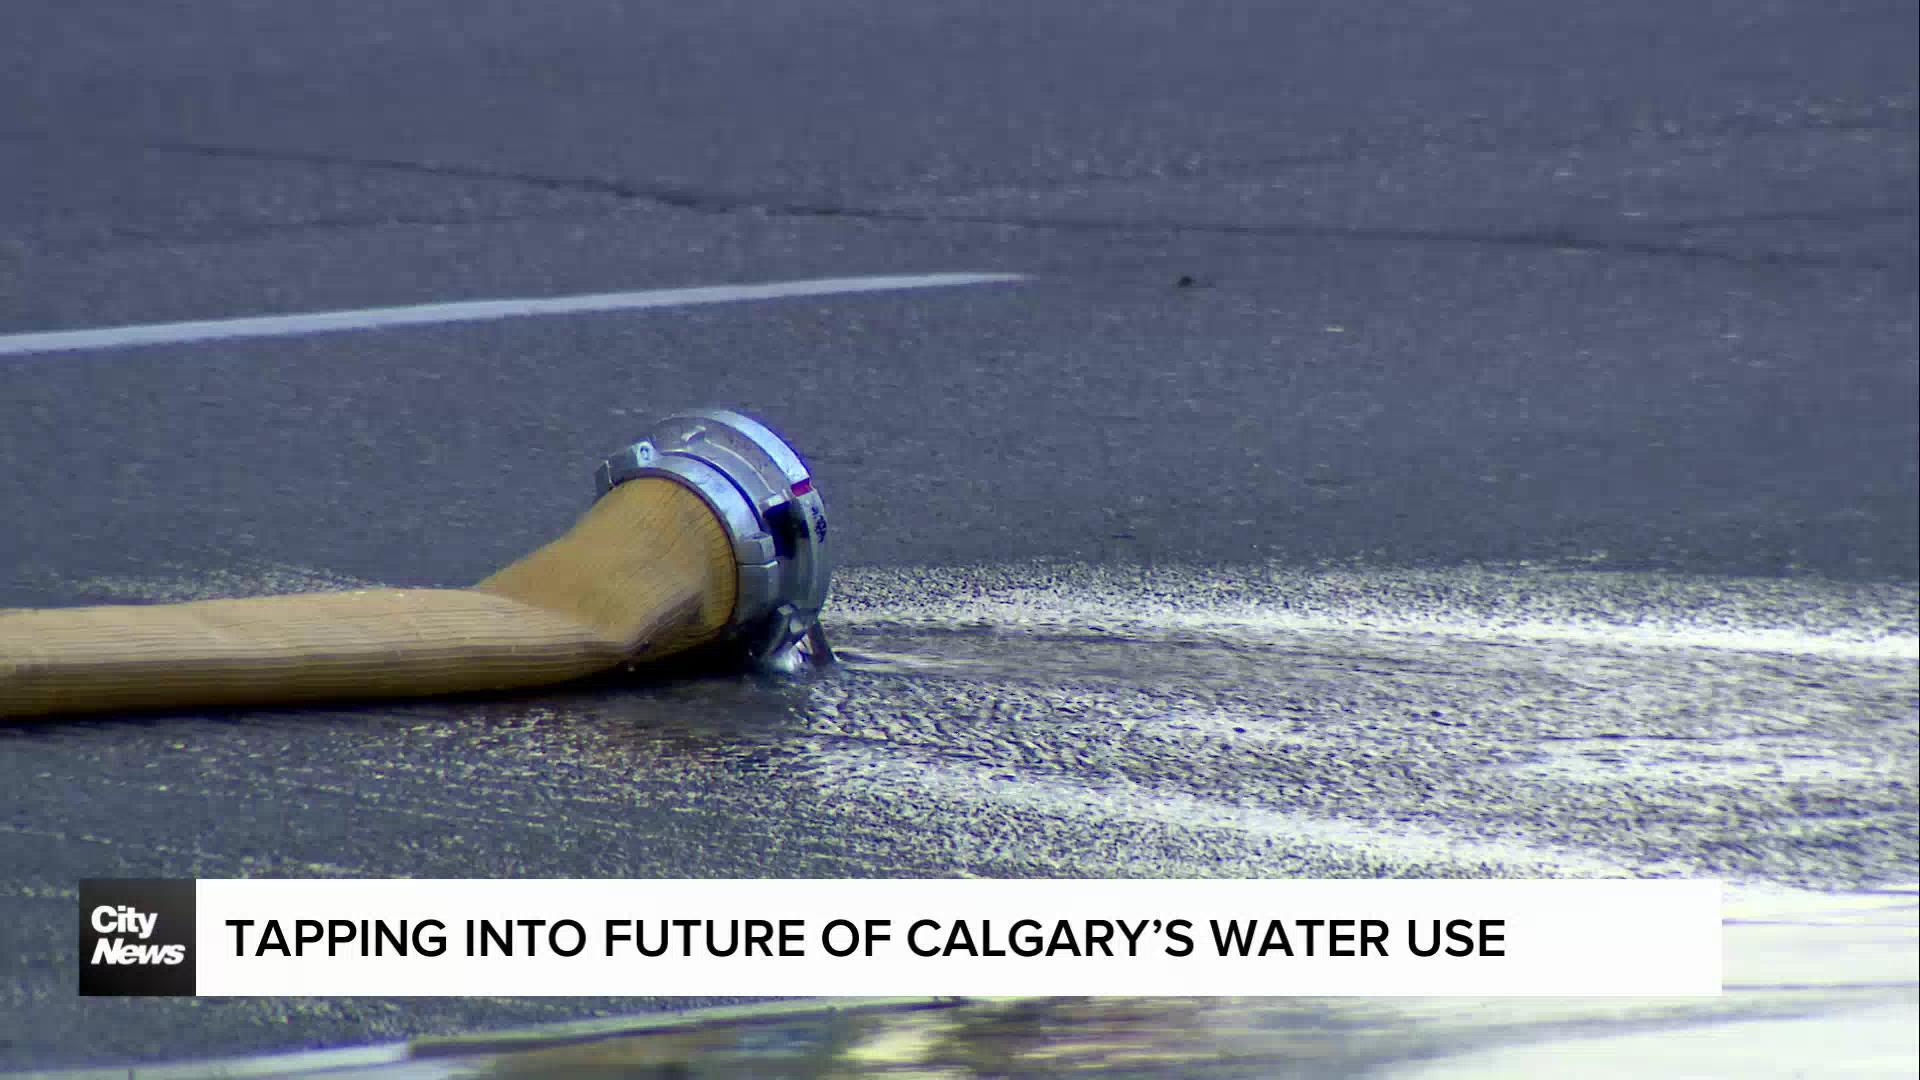 Tapping into future of Calgary's water use